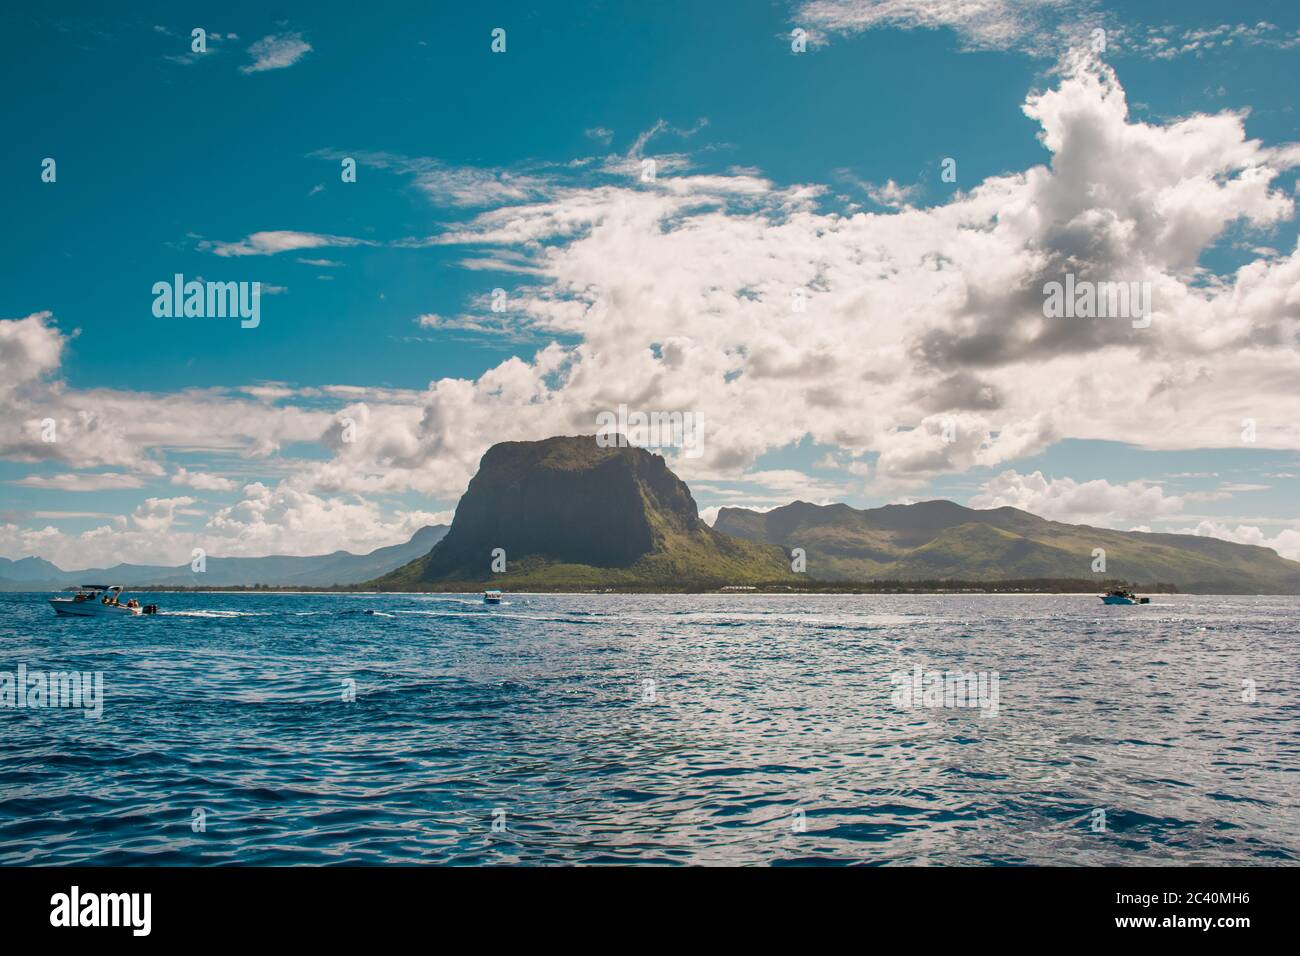 Swimming with dolphins in Le Morne Mauritius. Stock Photo